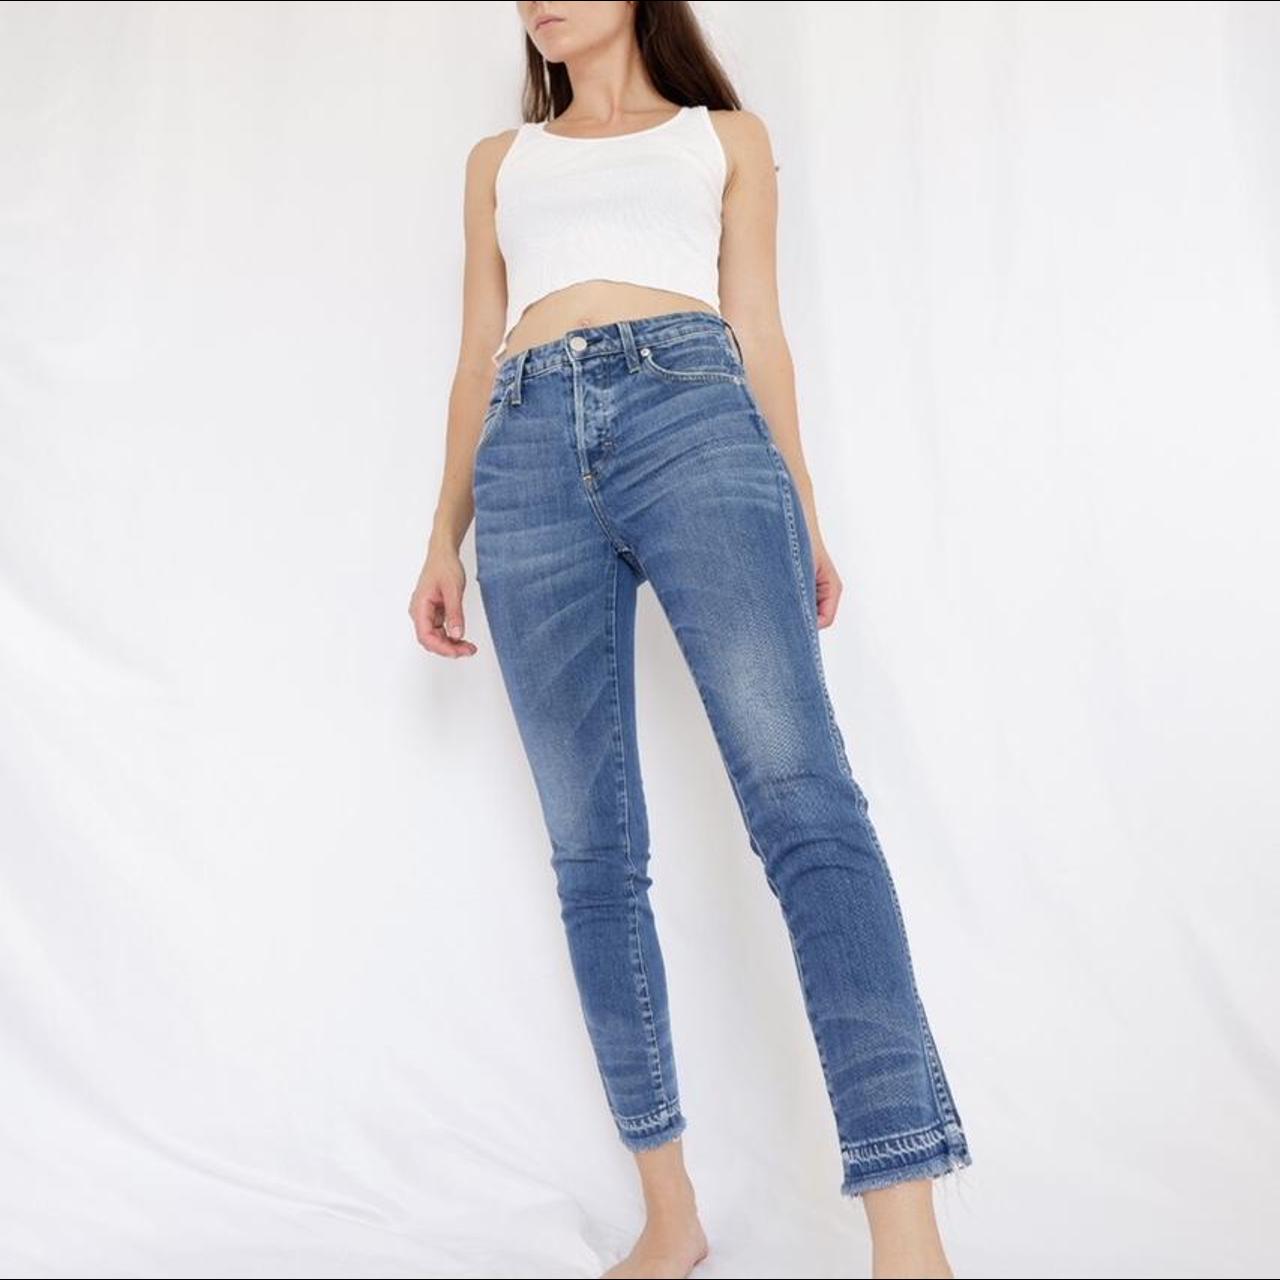 Product Image 1 - Cropped Skinny Jeans 

A pair